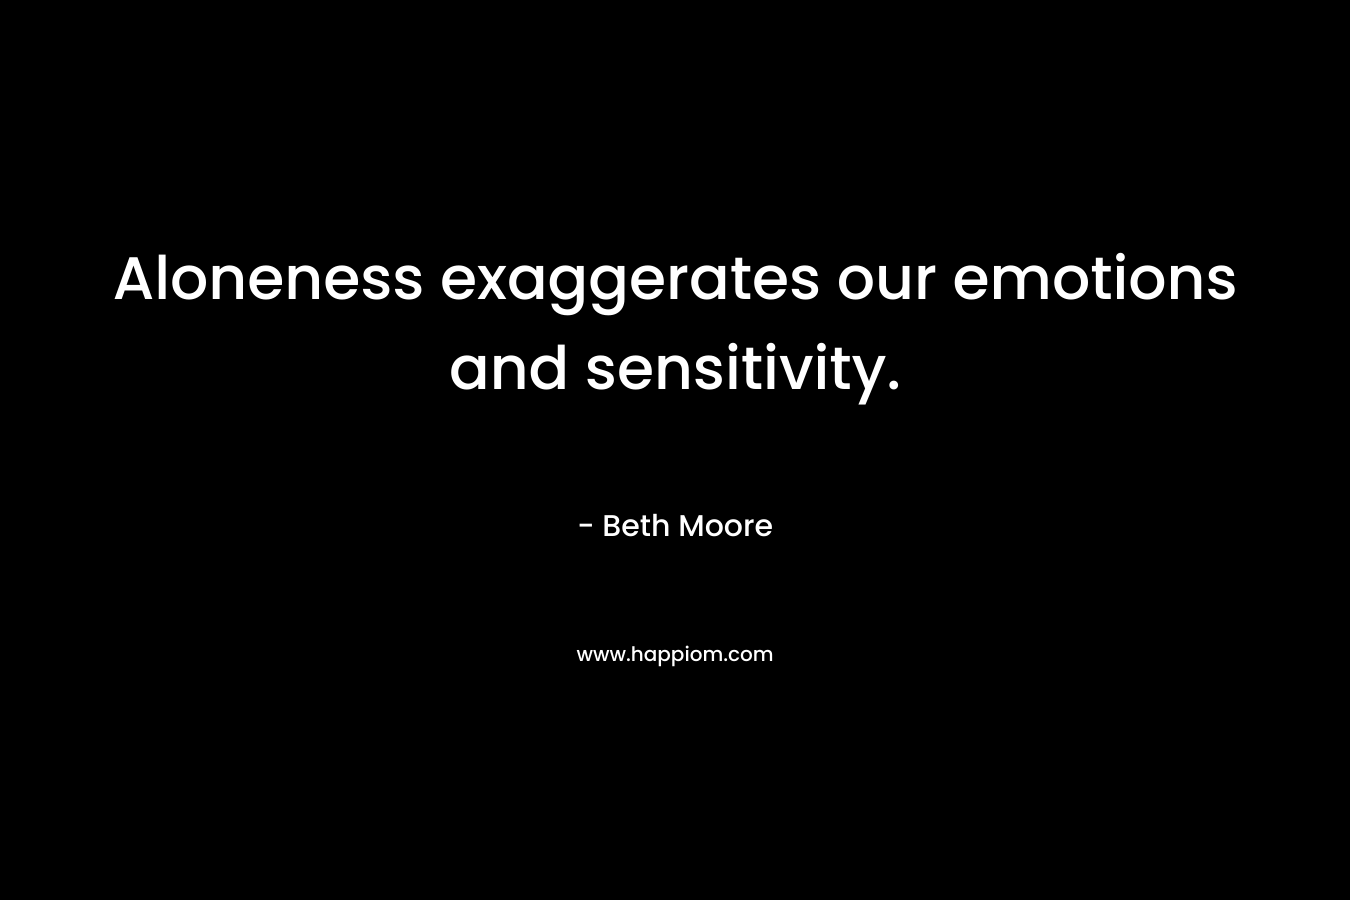 Aloneness exaggerates our emotions and sensitivity. – Beth Moore